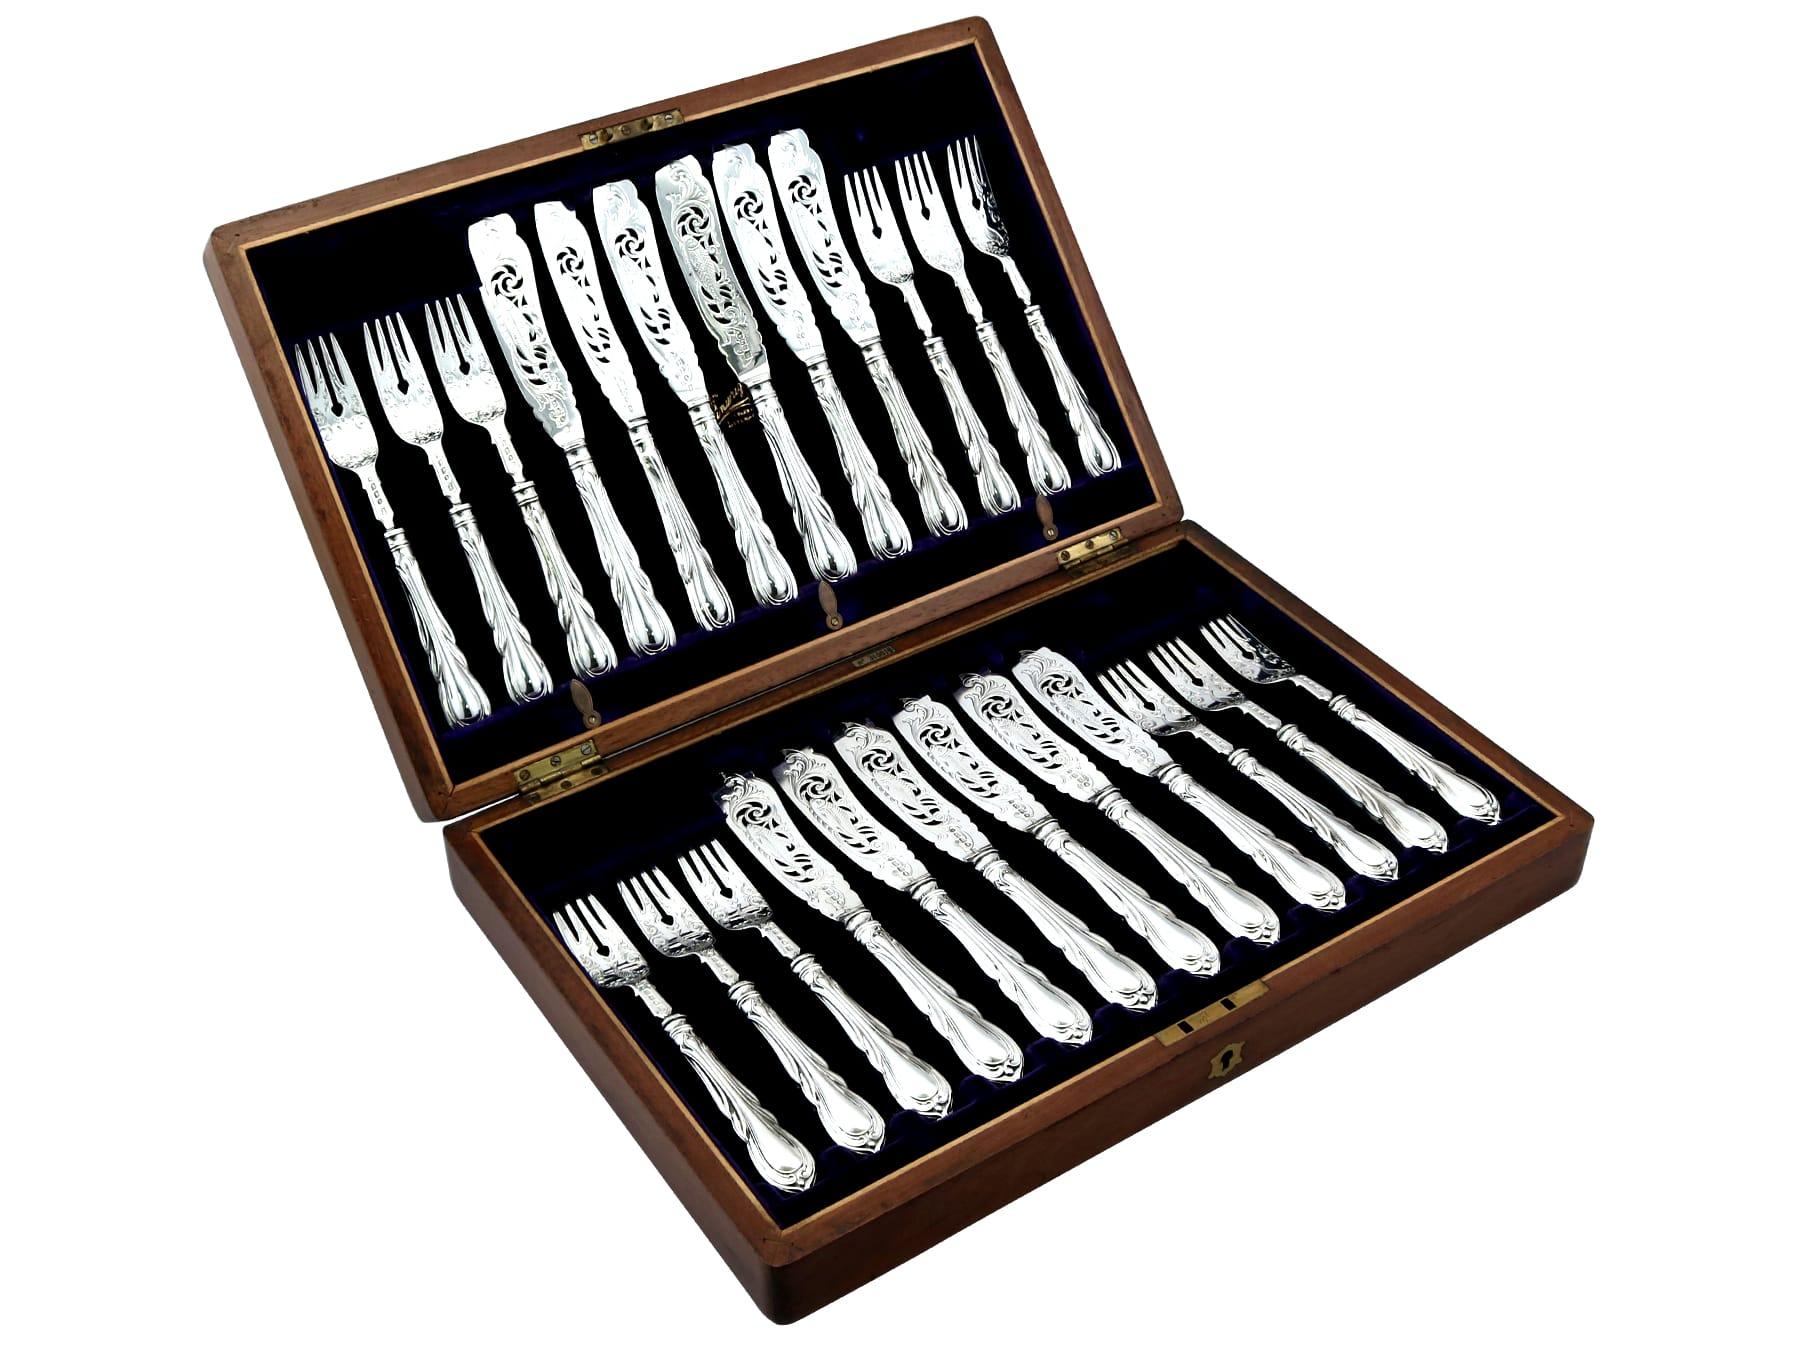 An exceptional, fine and impressive antique Victorian English sterling silver Lily pattern fish cutlery set for eighteen persons - boxed; an addition to our dining silverware collection

This exceptional antique Victorian sterling silver flatware